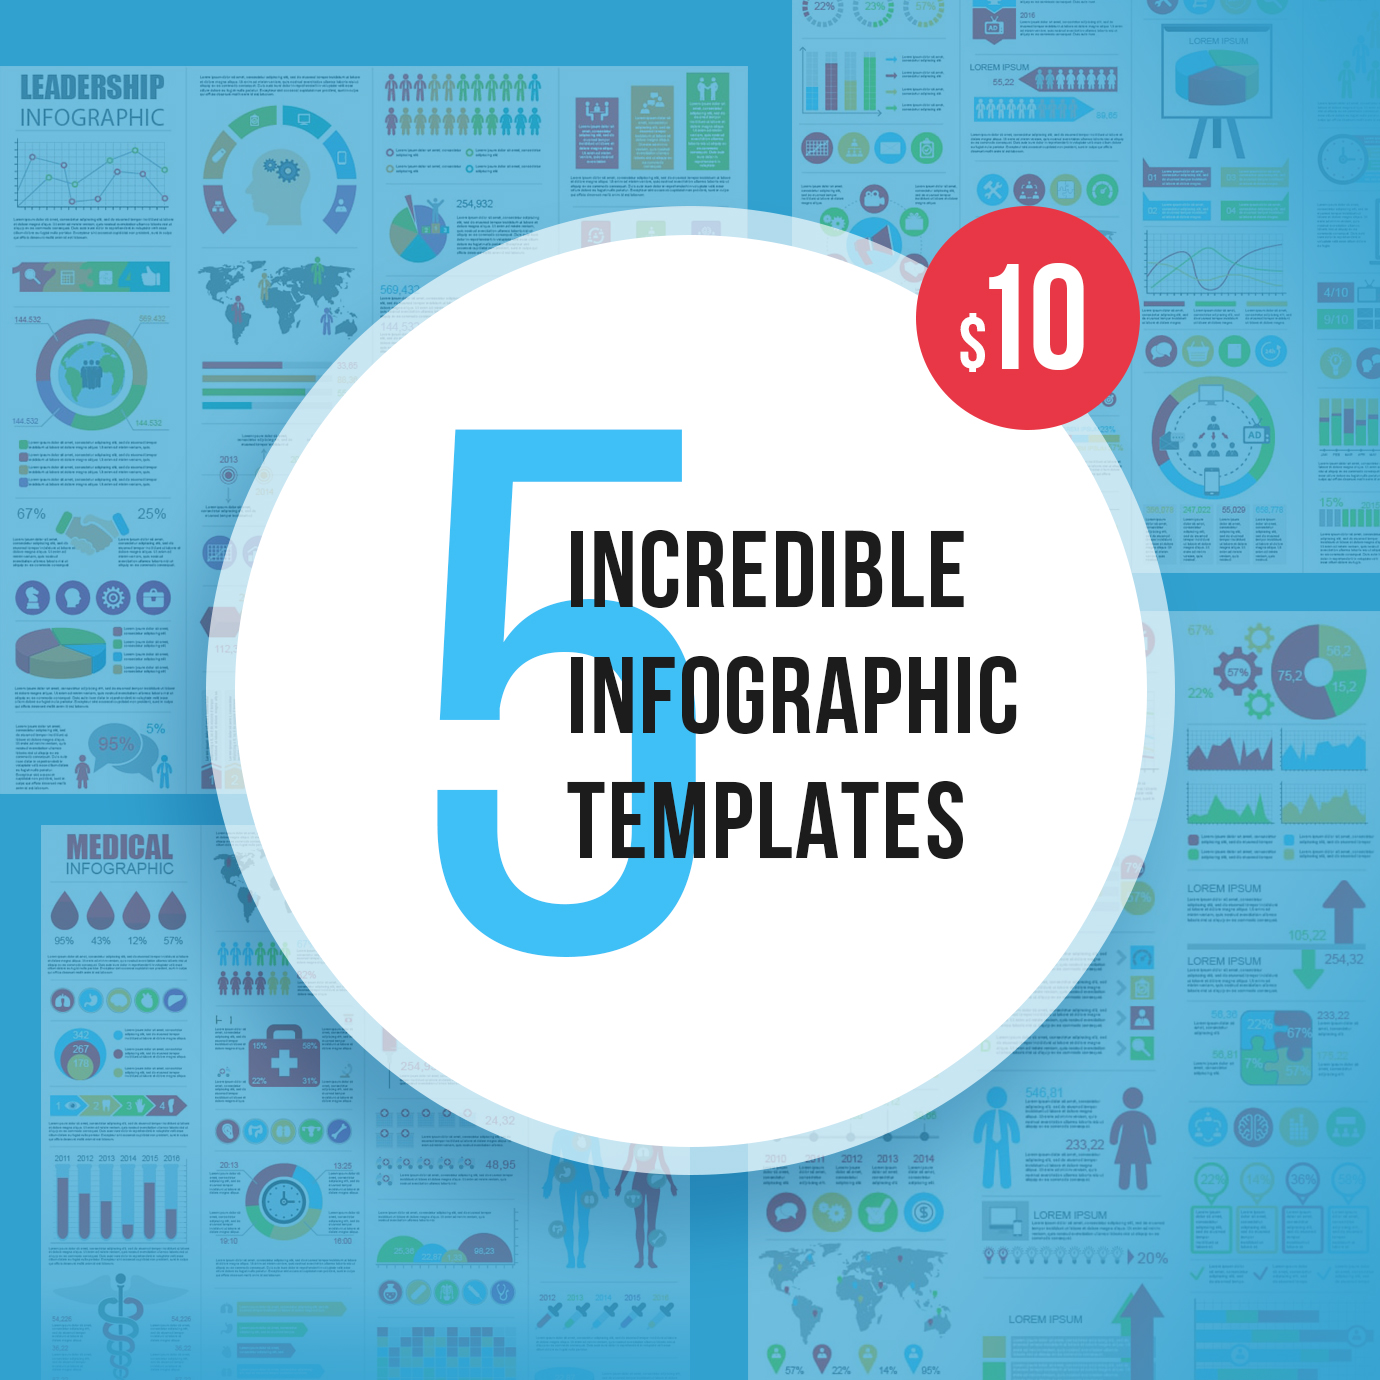 5 Incredible Infographic Templates